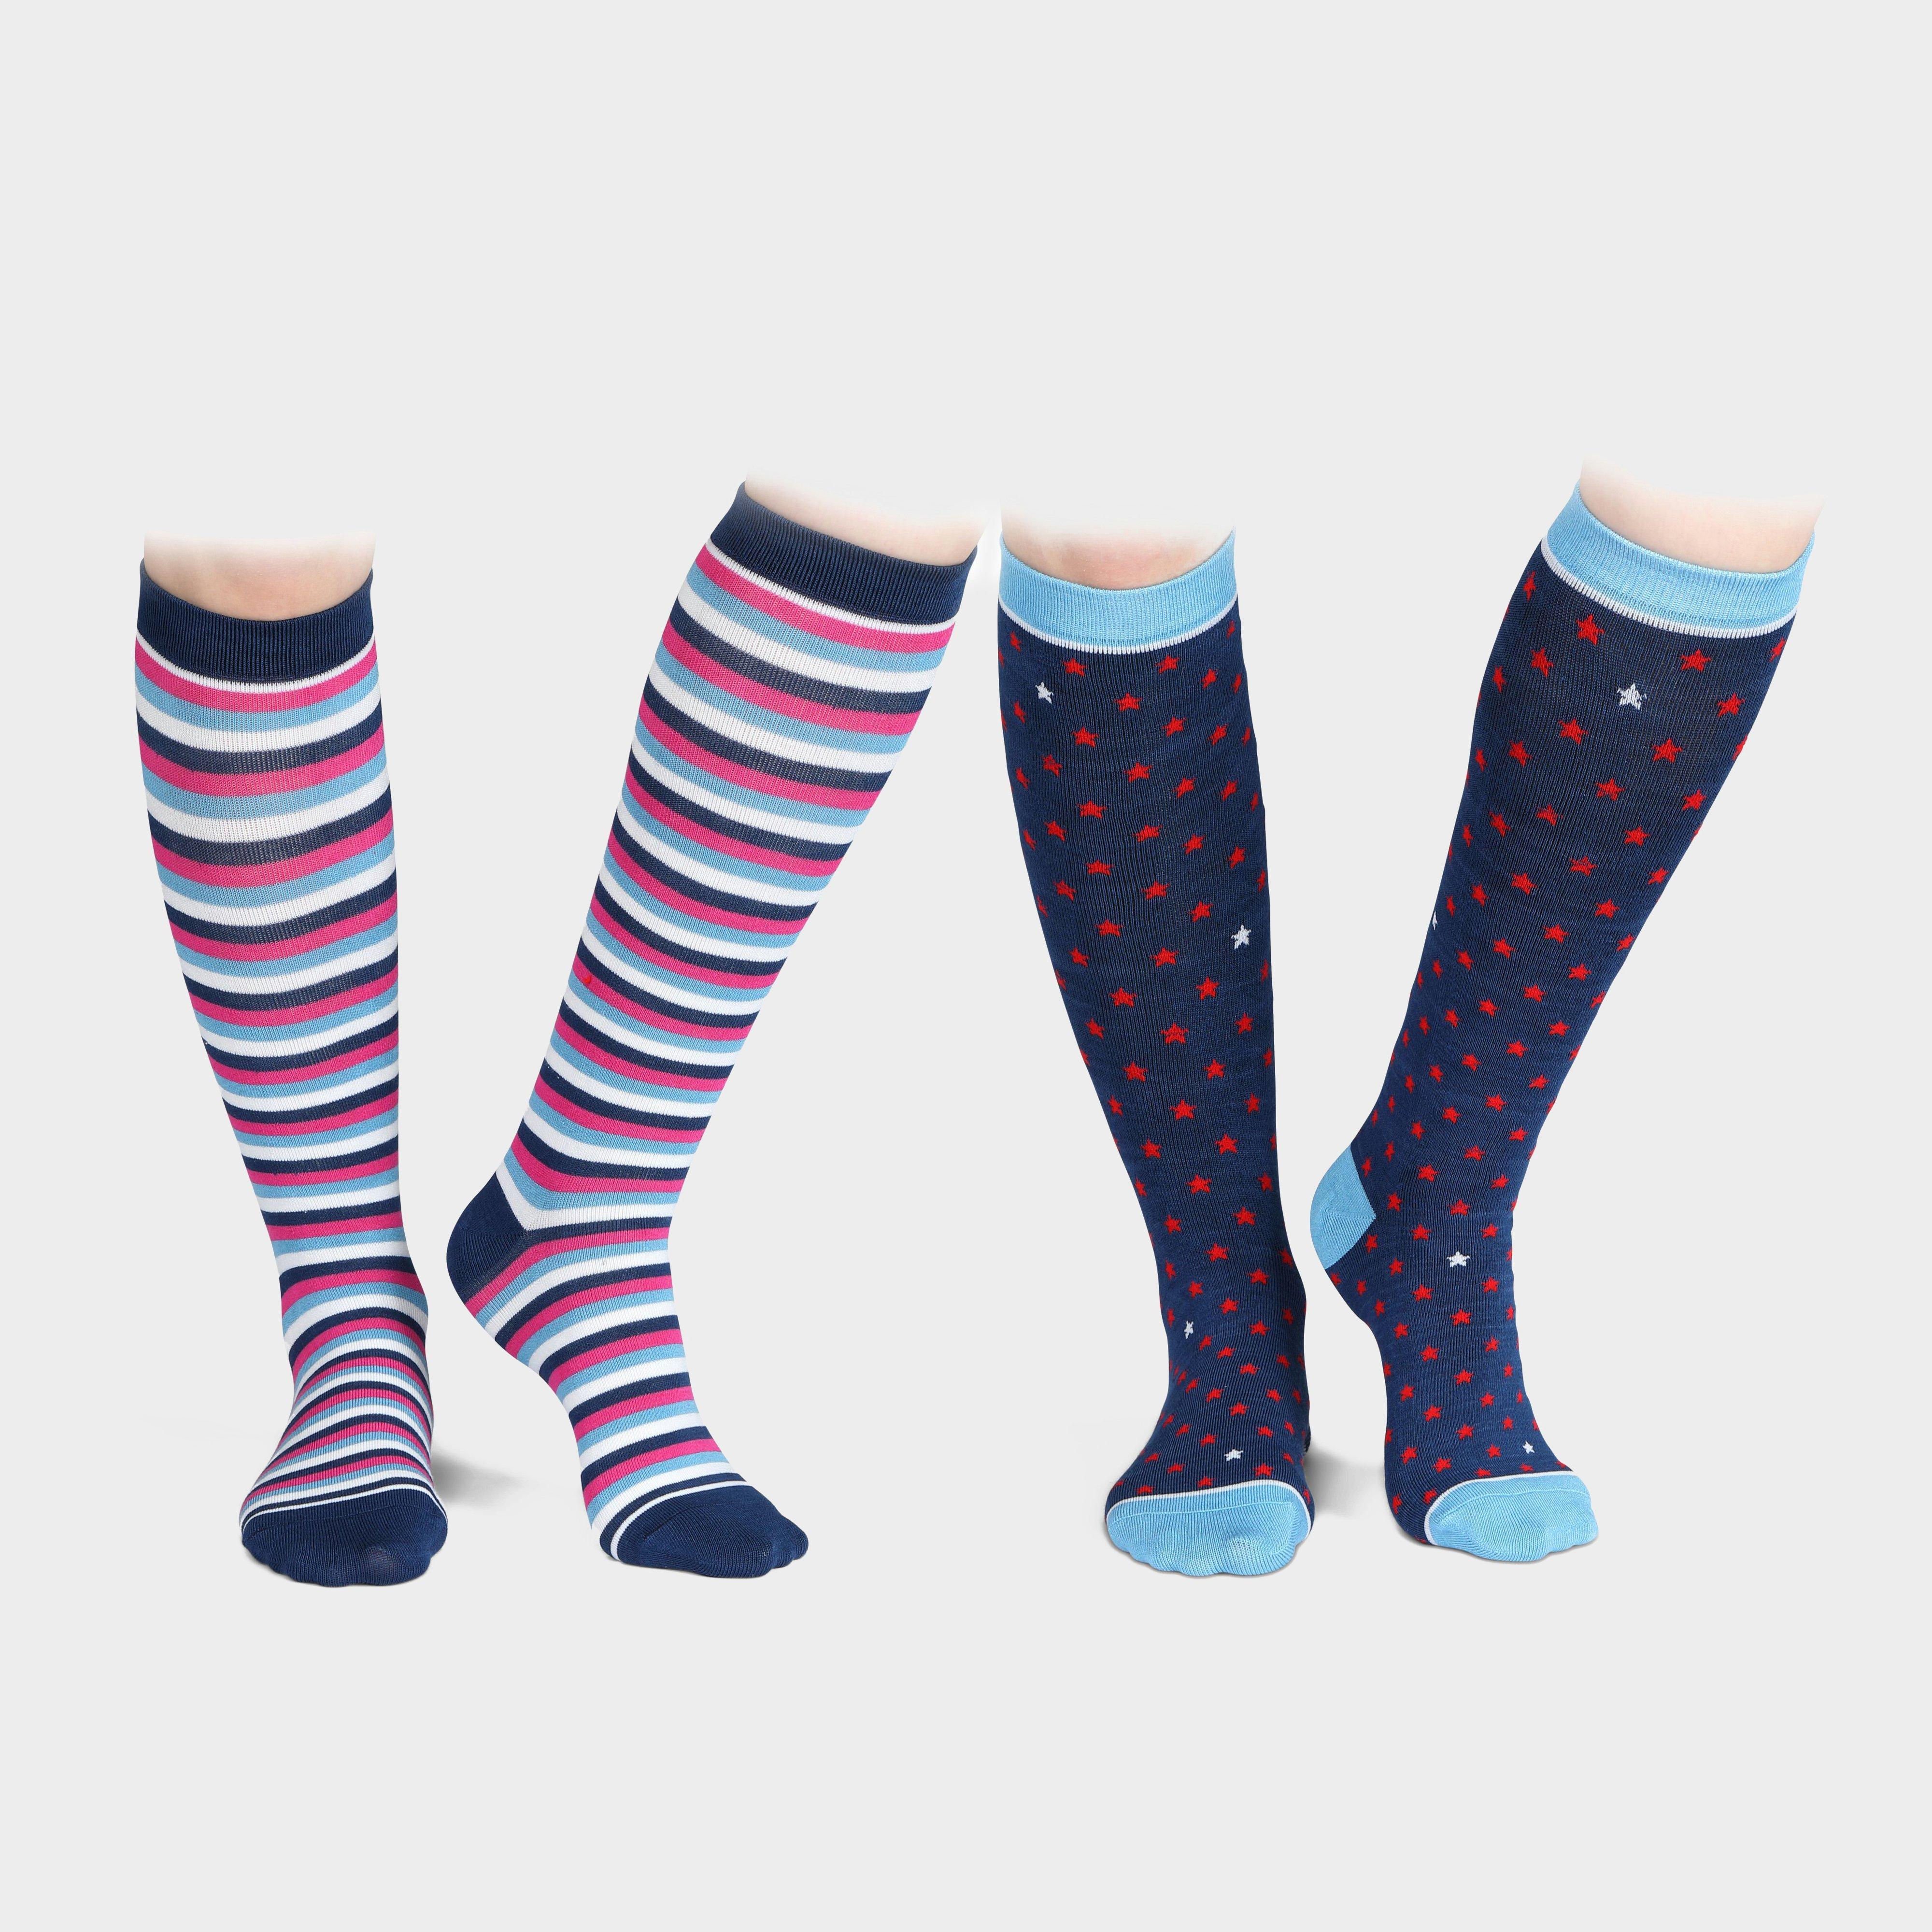 Shires Unisex Bamboo Socks 2 Pack - Adults/adults  Adults/adults